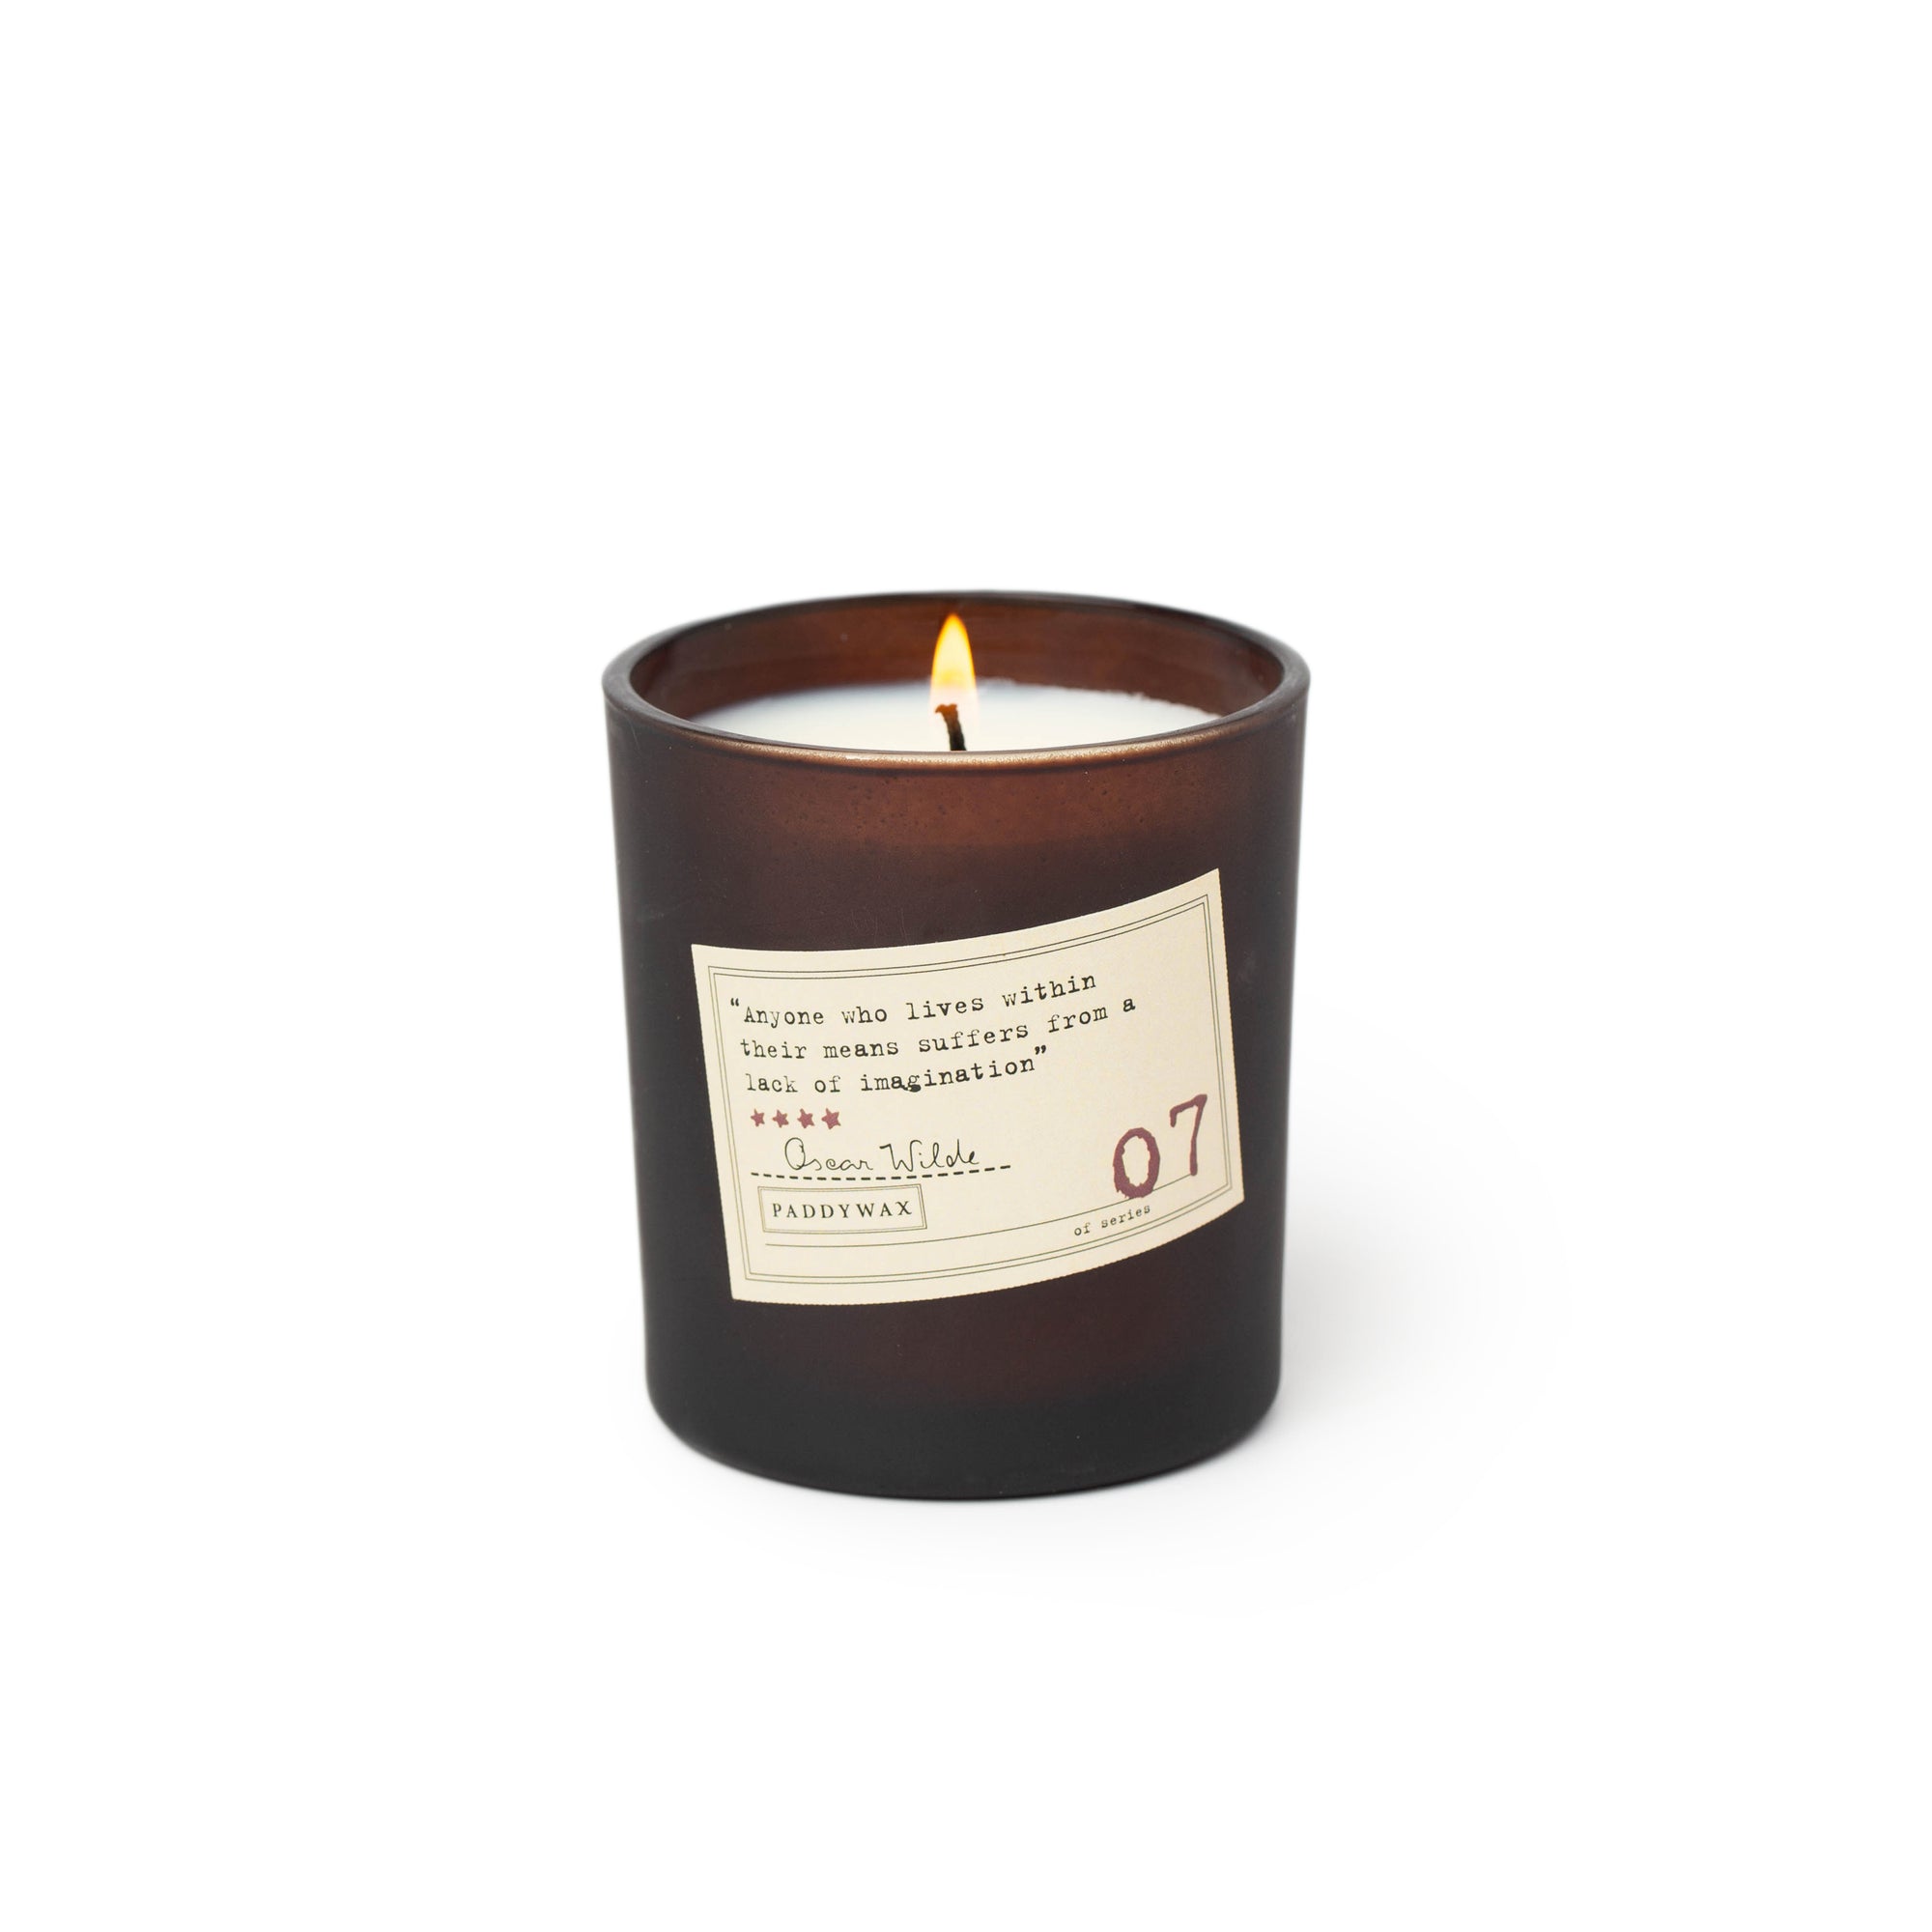 Paddy Wax Library Candle (170g) - Oscar Wilde